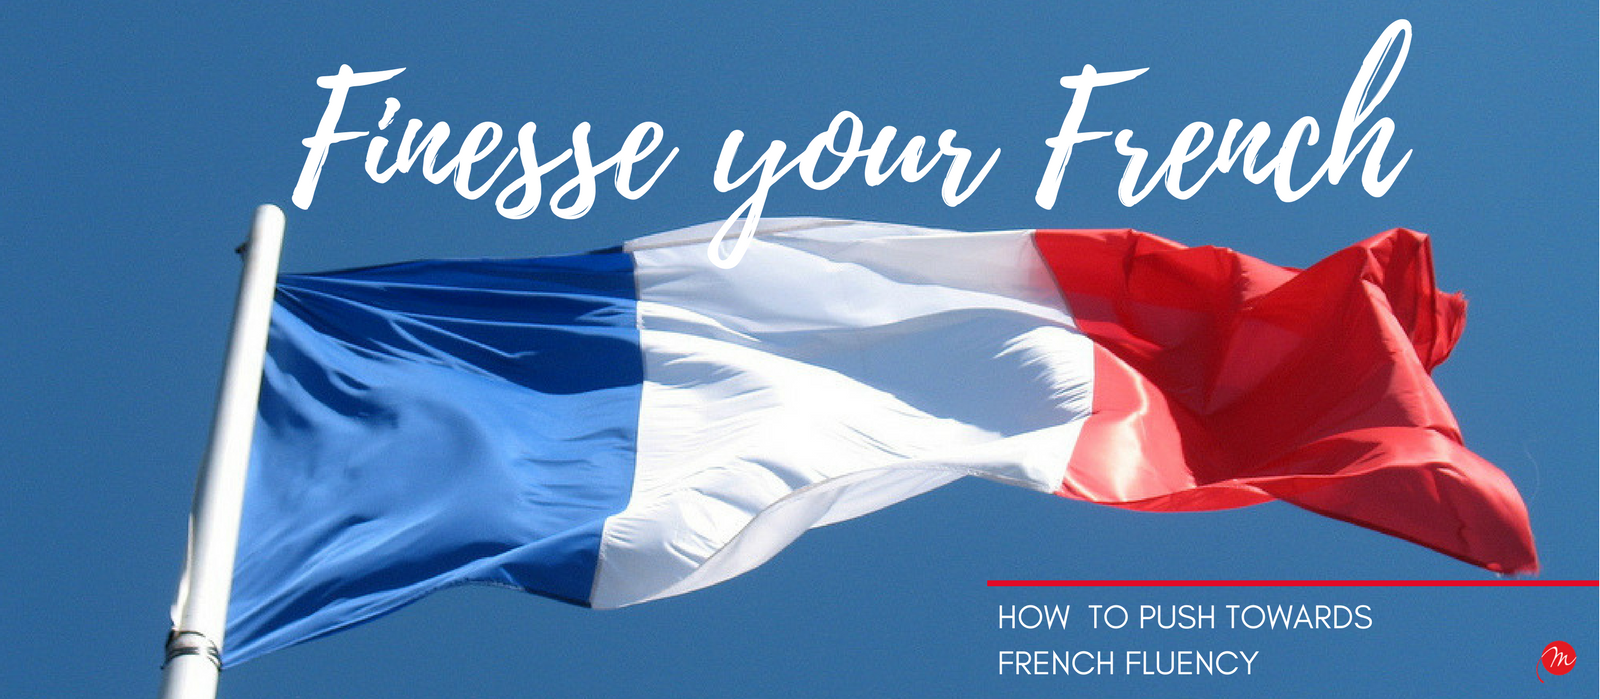 MyFrenchLife™ - MyFrenchLife.org - Finesse your French - How to push towards French fluency - French fluency - Header